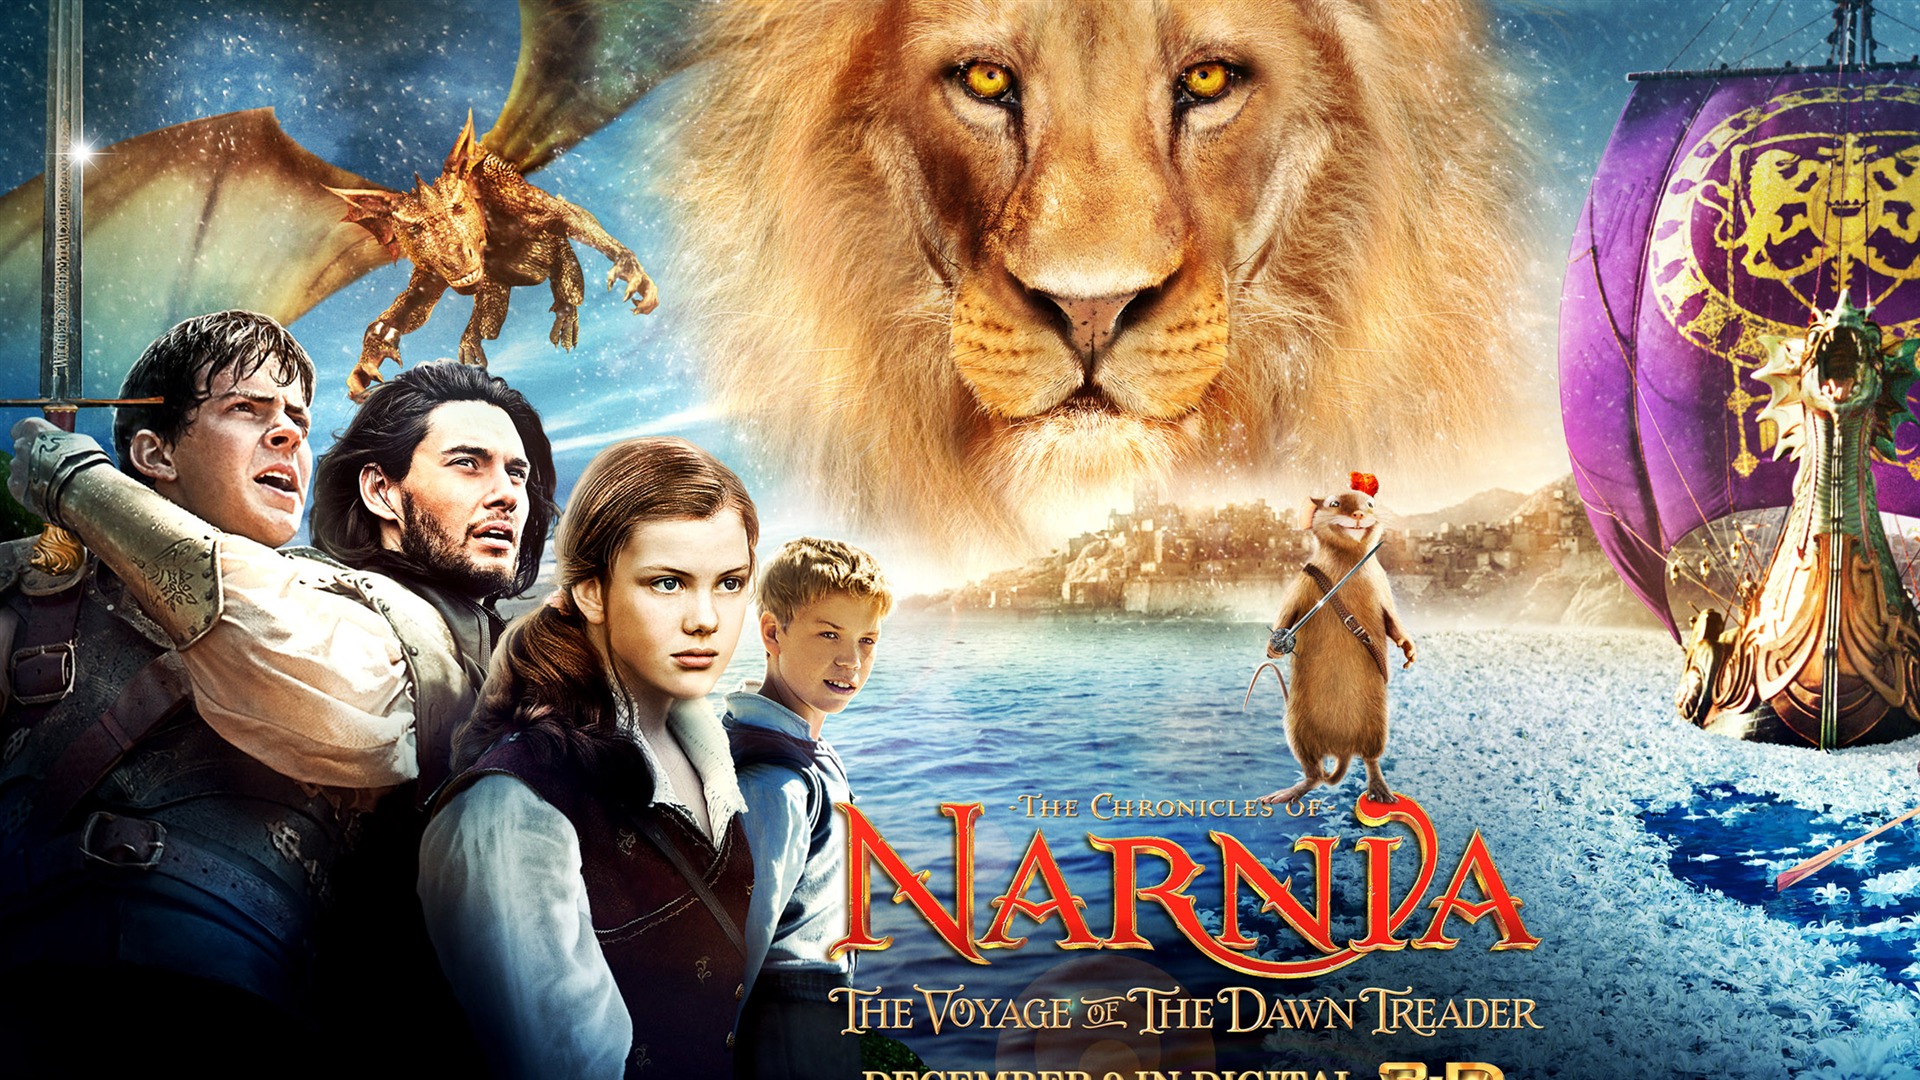 The Chronicles of Narnia: The Voyage of the Dawn Treader wallpapers #14 - 1920x1080